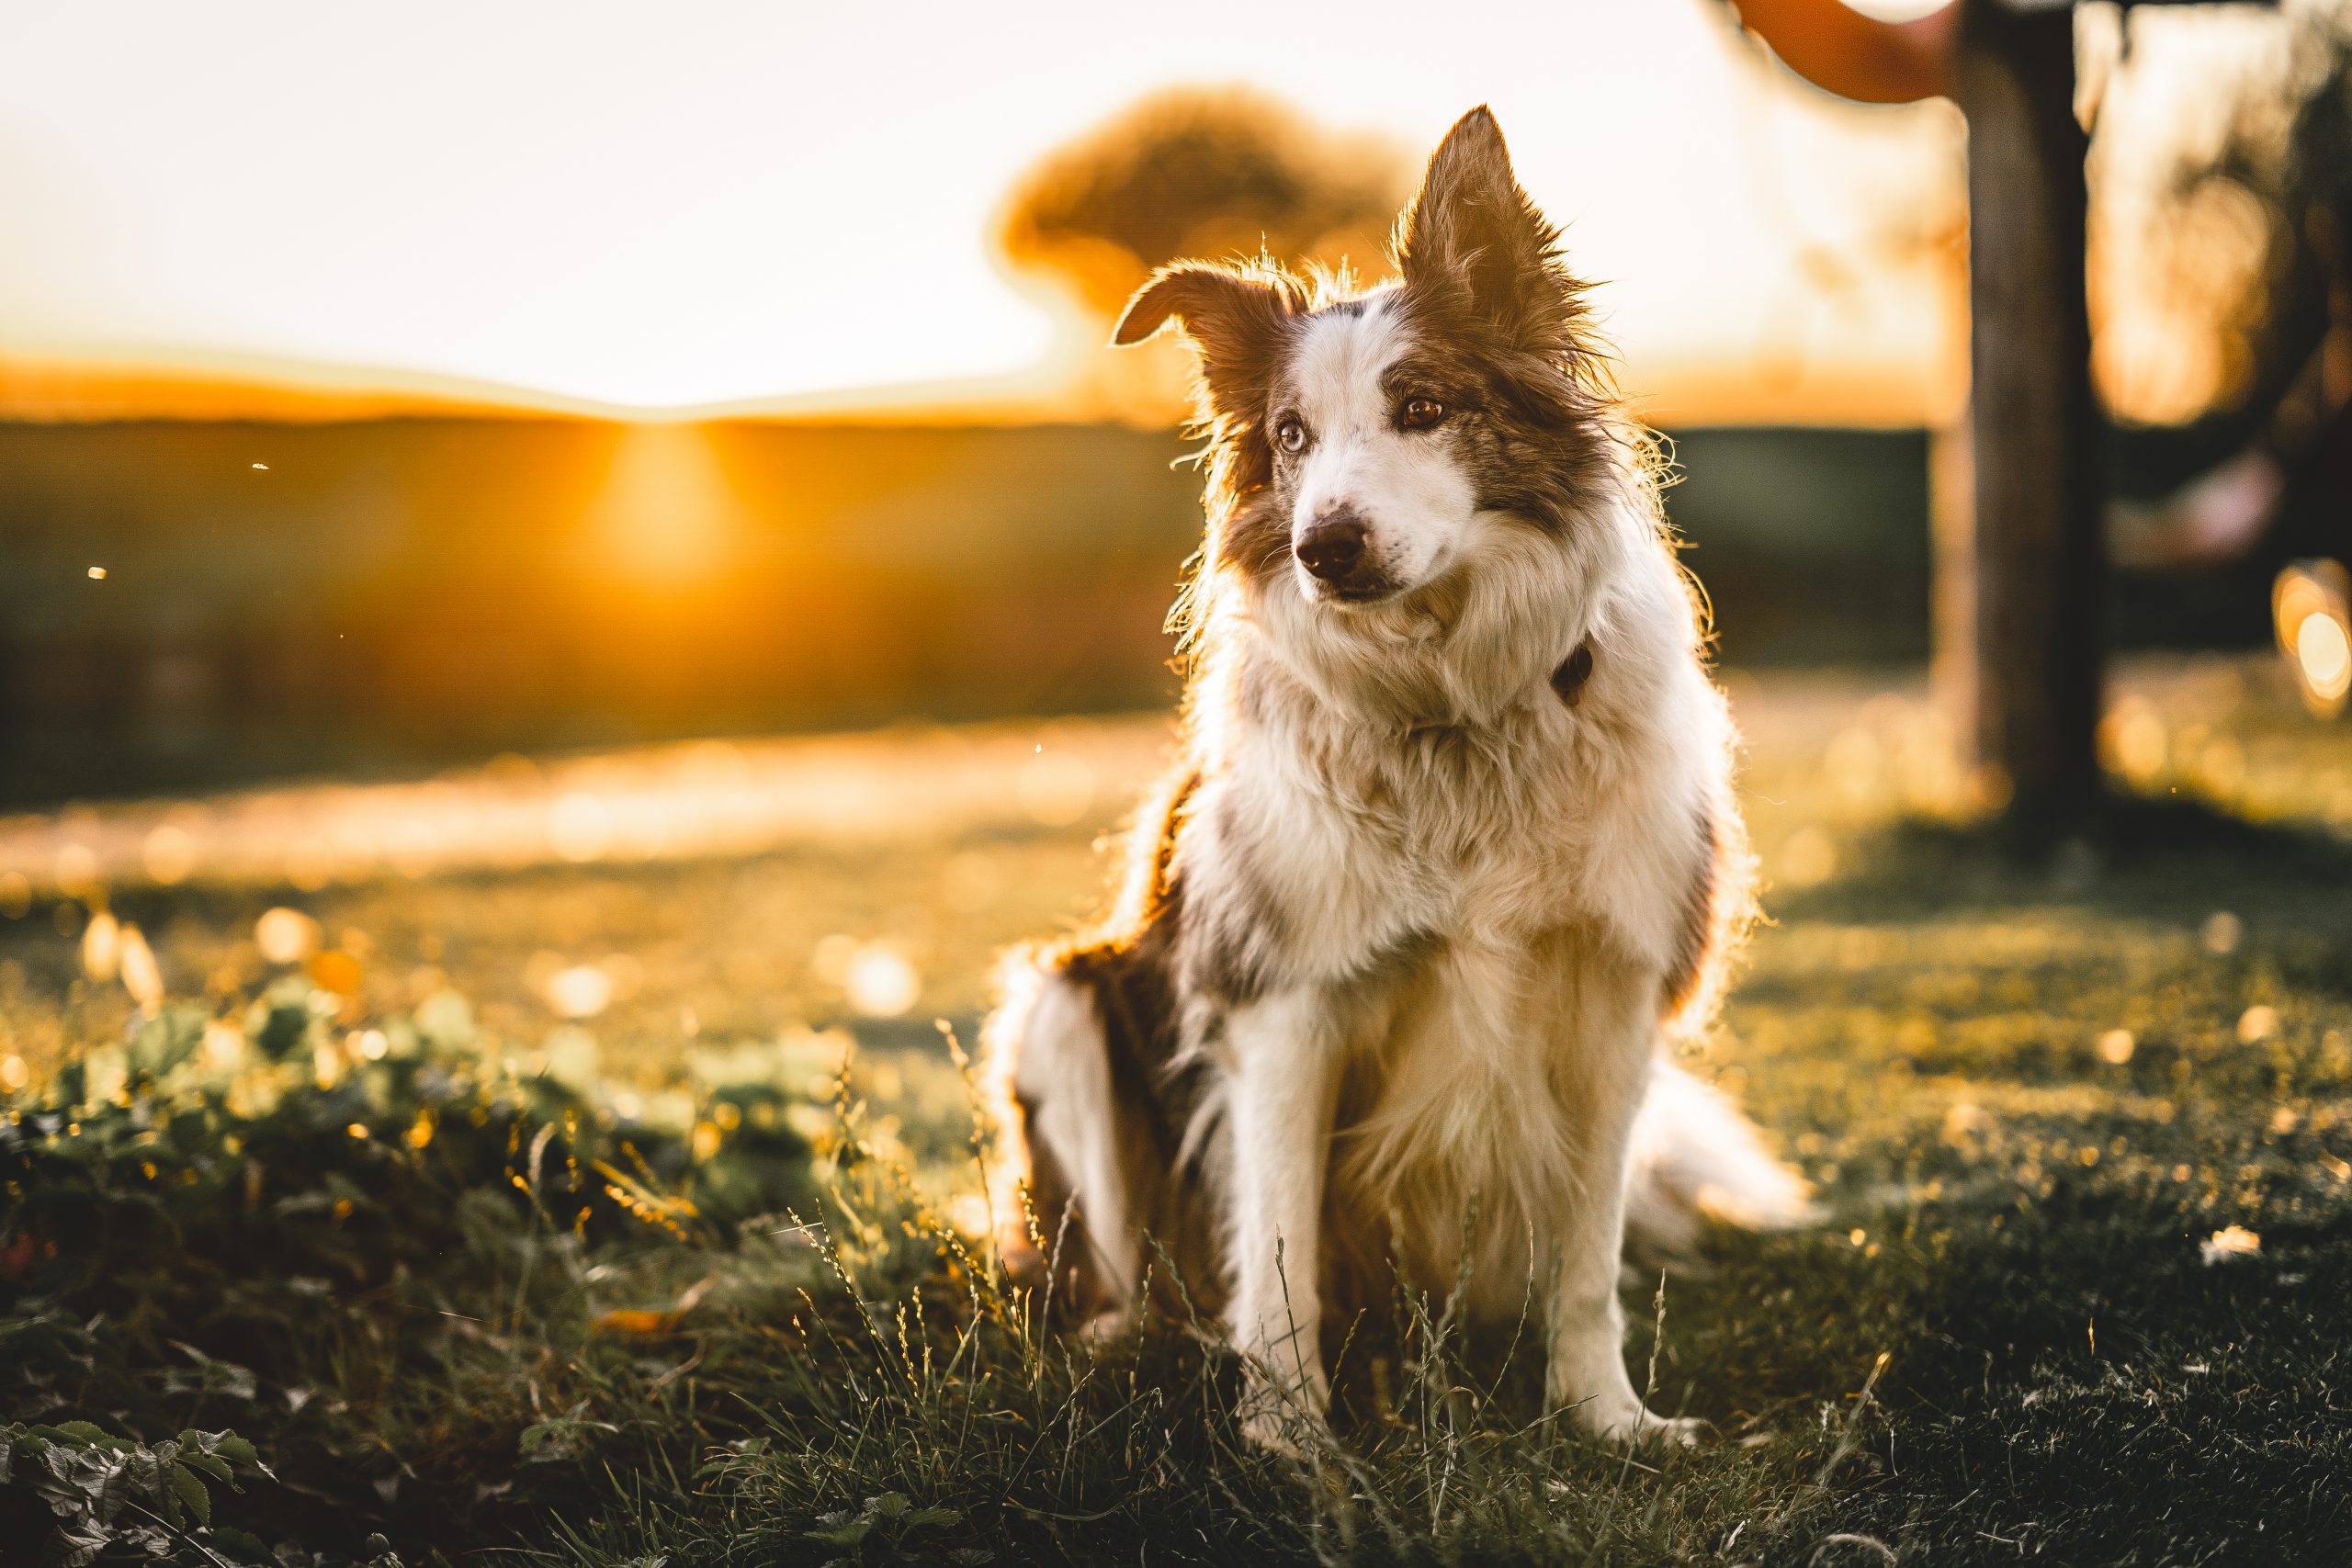 Dogs – Collies